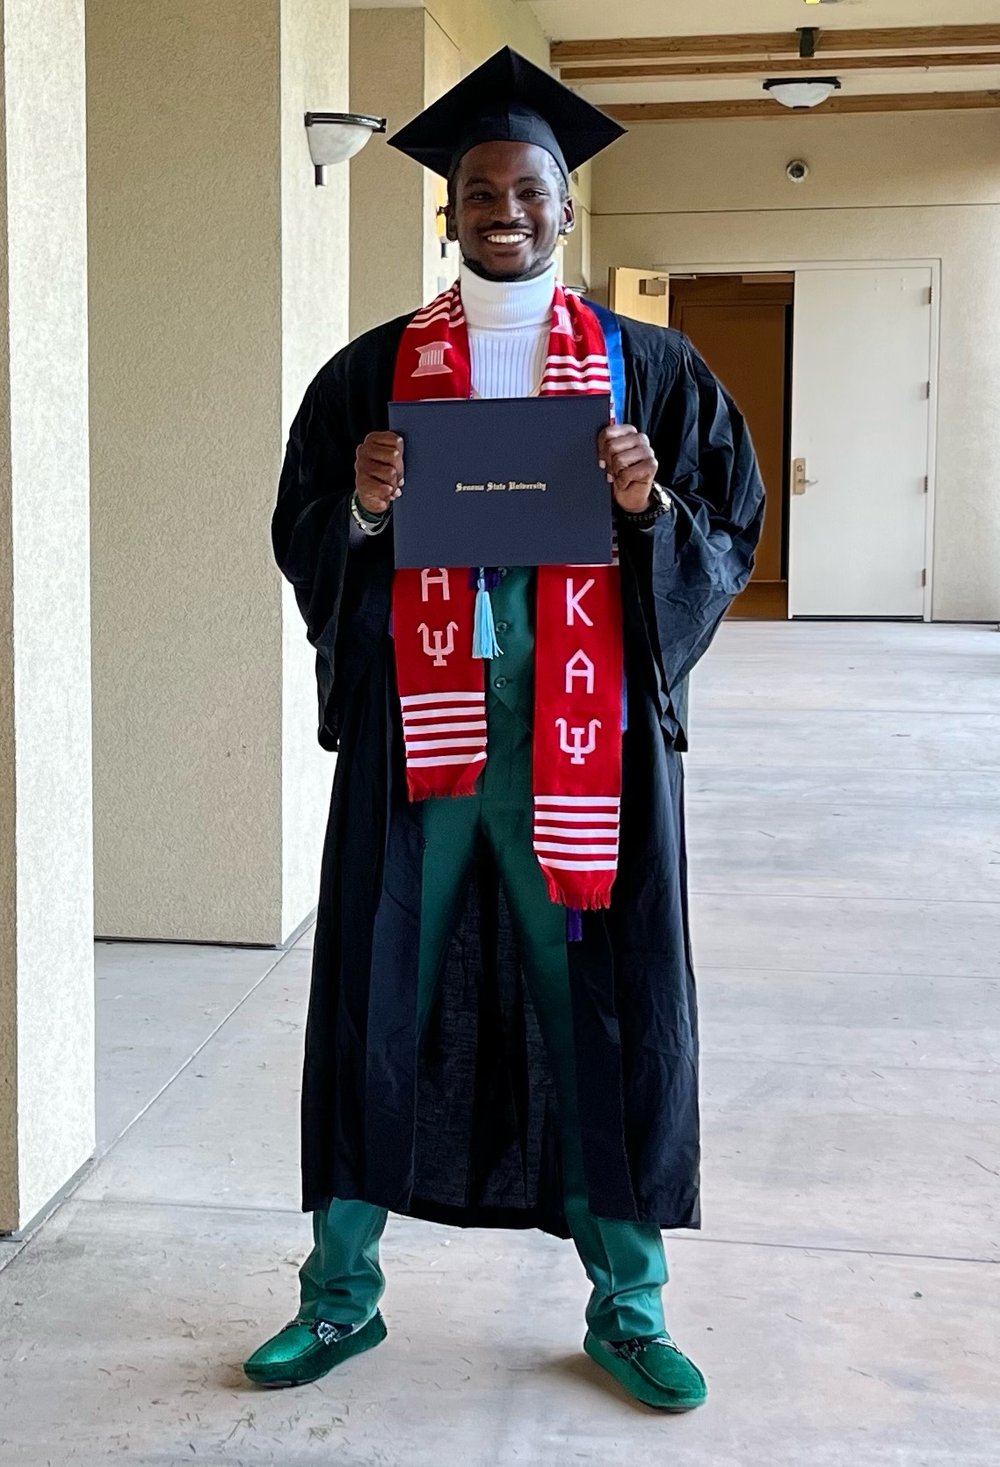 A student smiling and posing with their diploma at Black Graduation